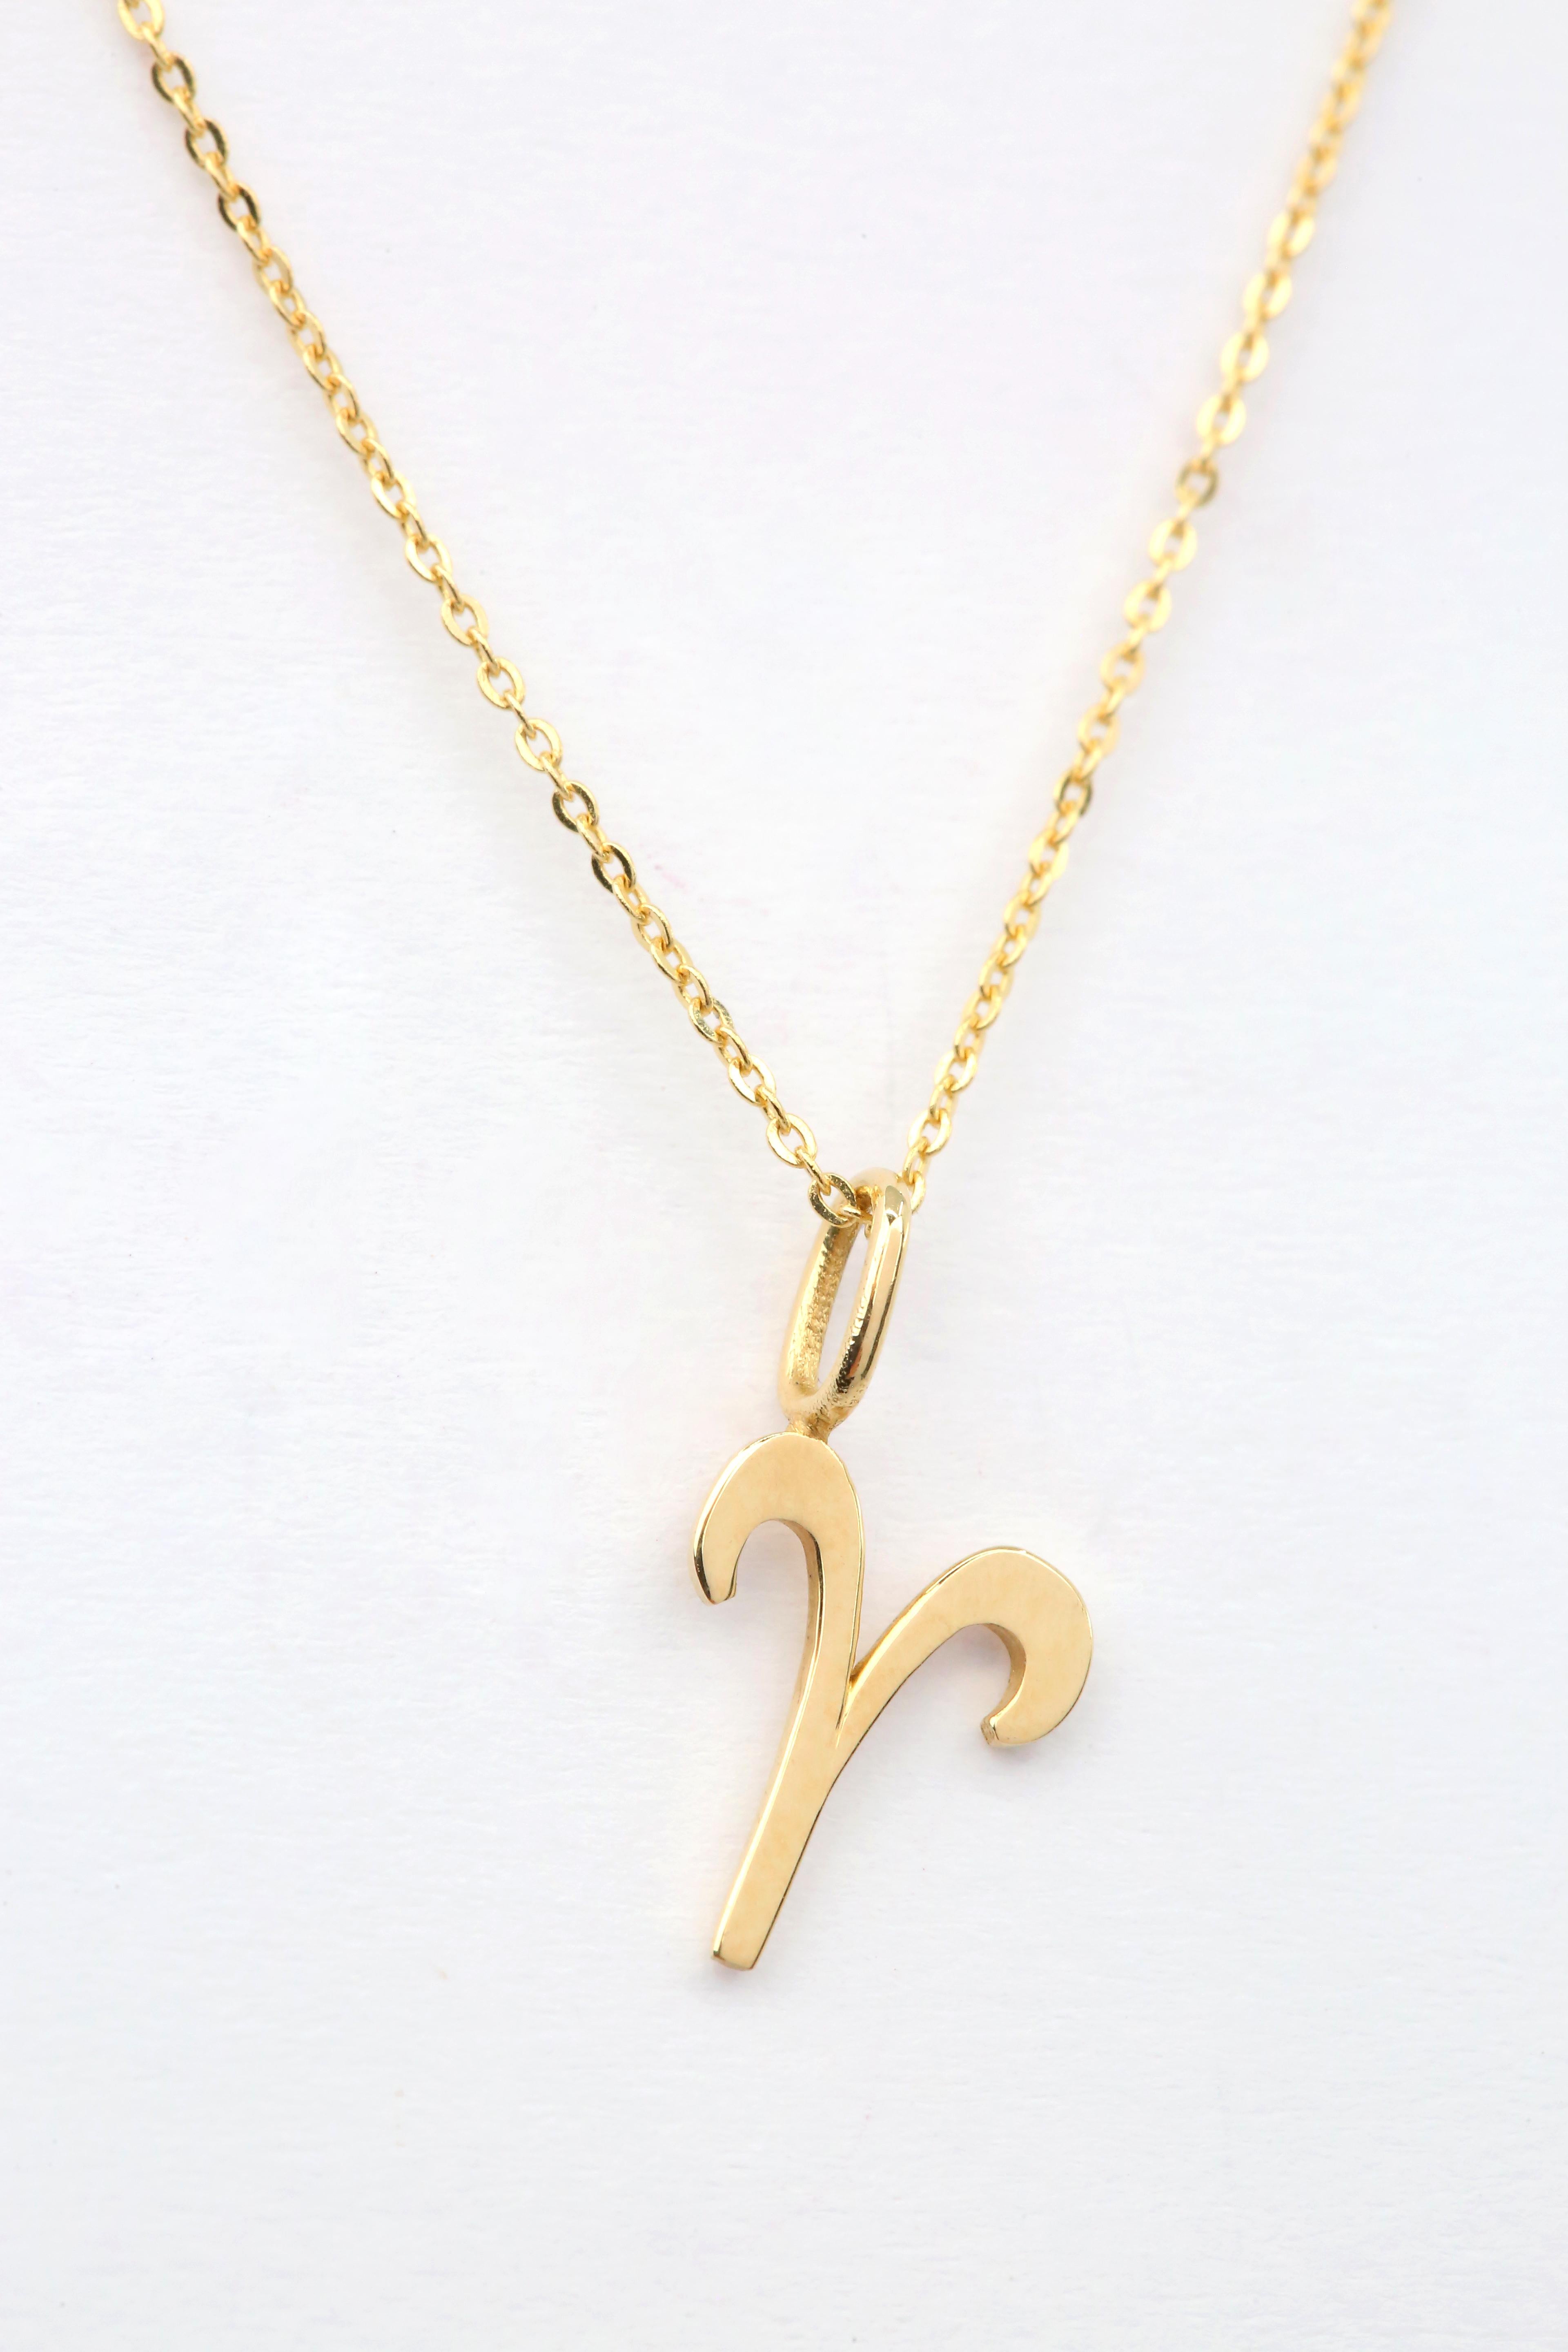 aries zodiac sign necklace